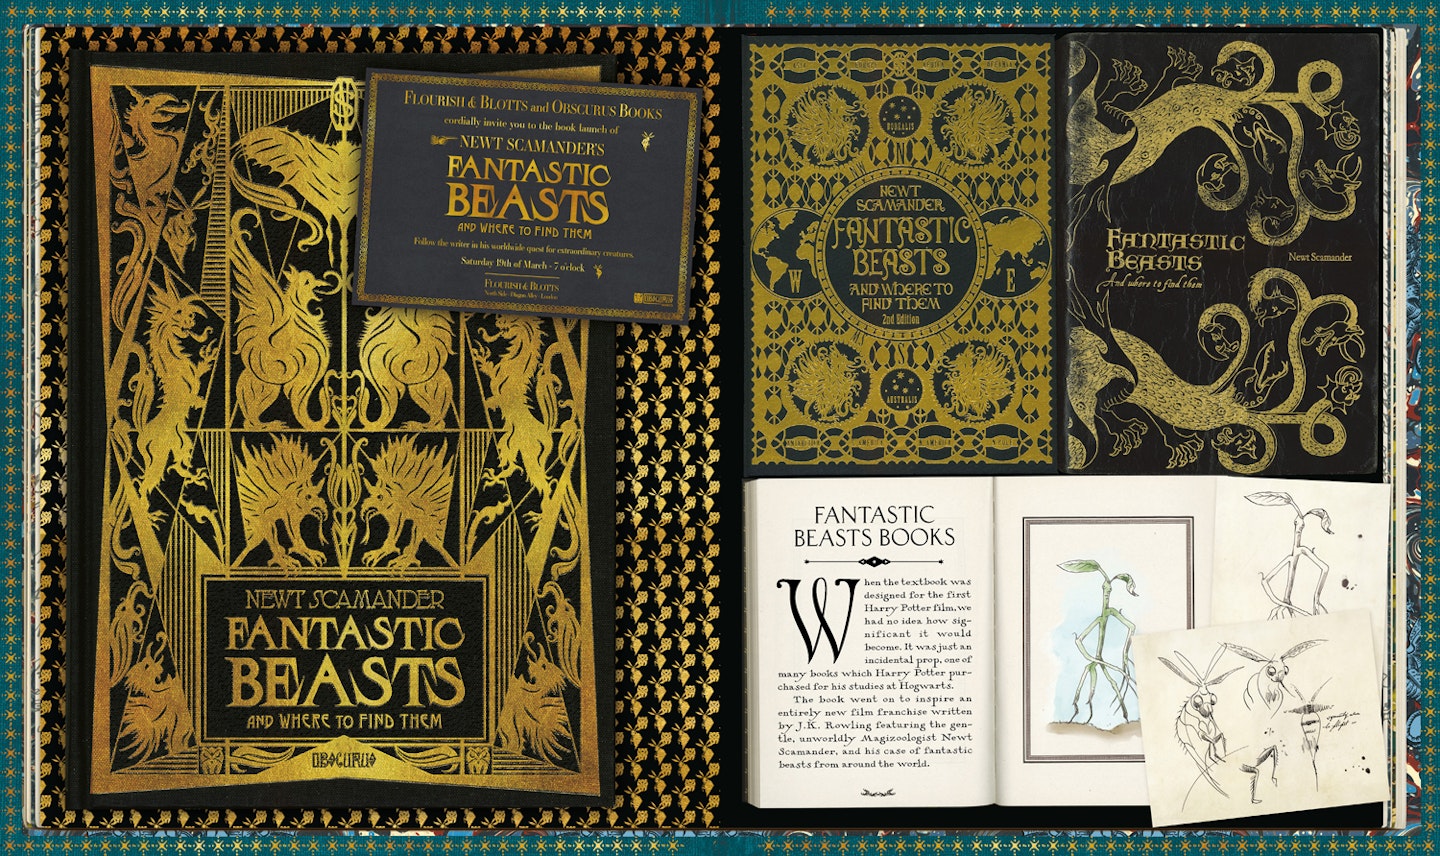 Review: The Magic of MinaLima: Celebrating the Graphic Design